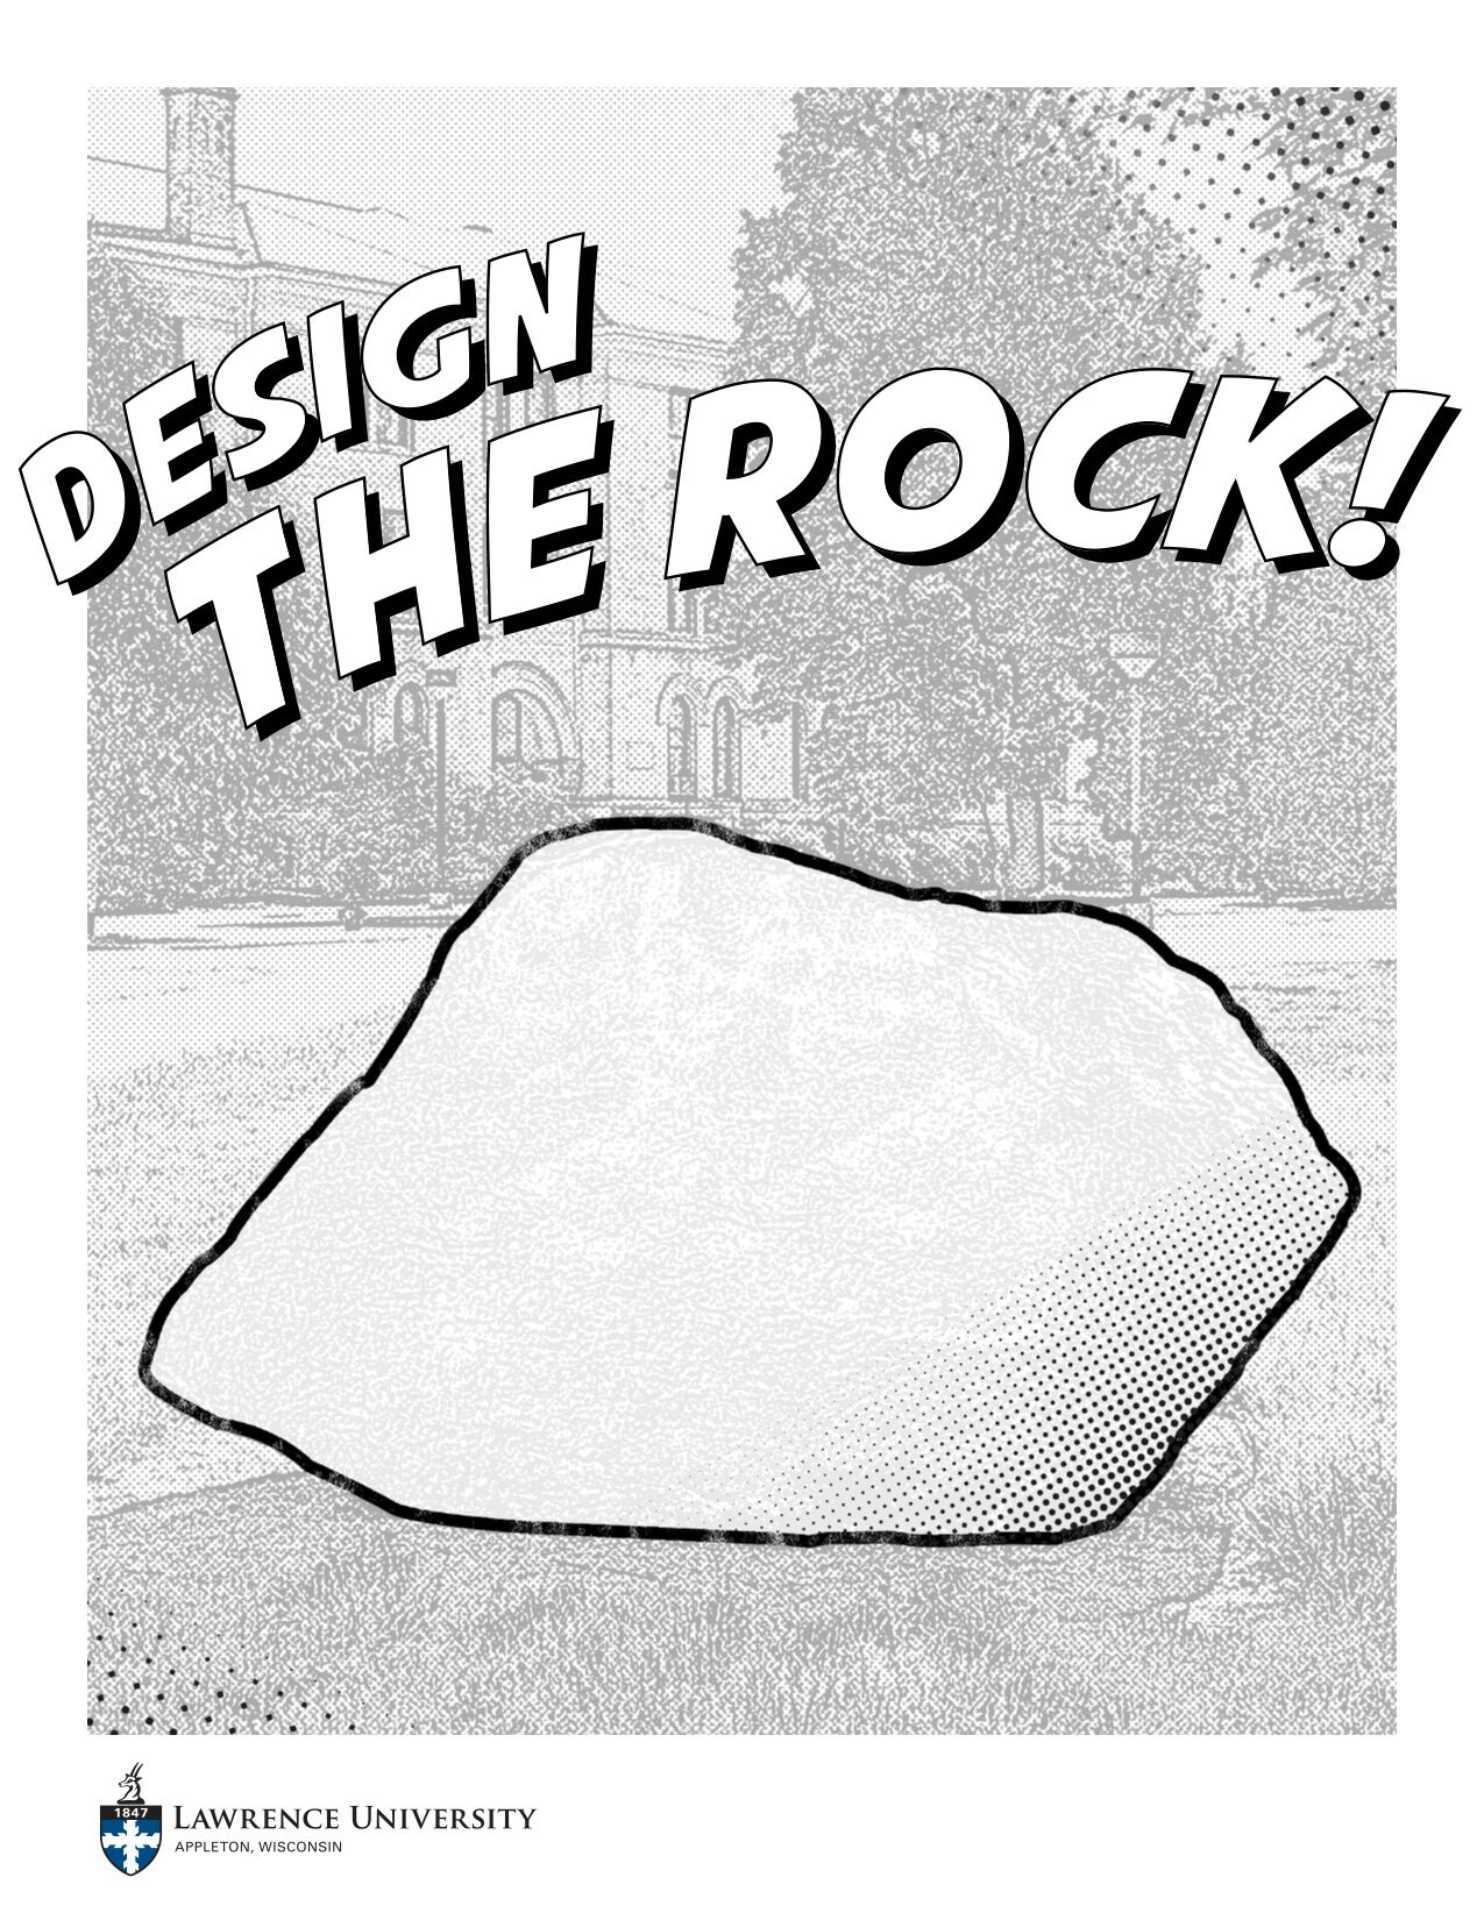 Black and white outline of a rock with text "Design the Rock!" over it.